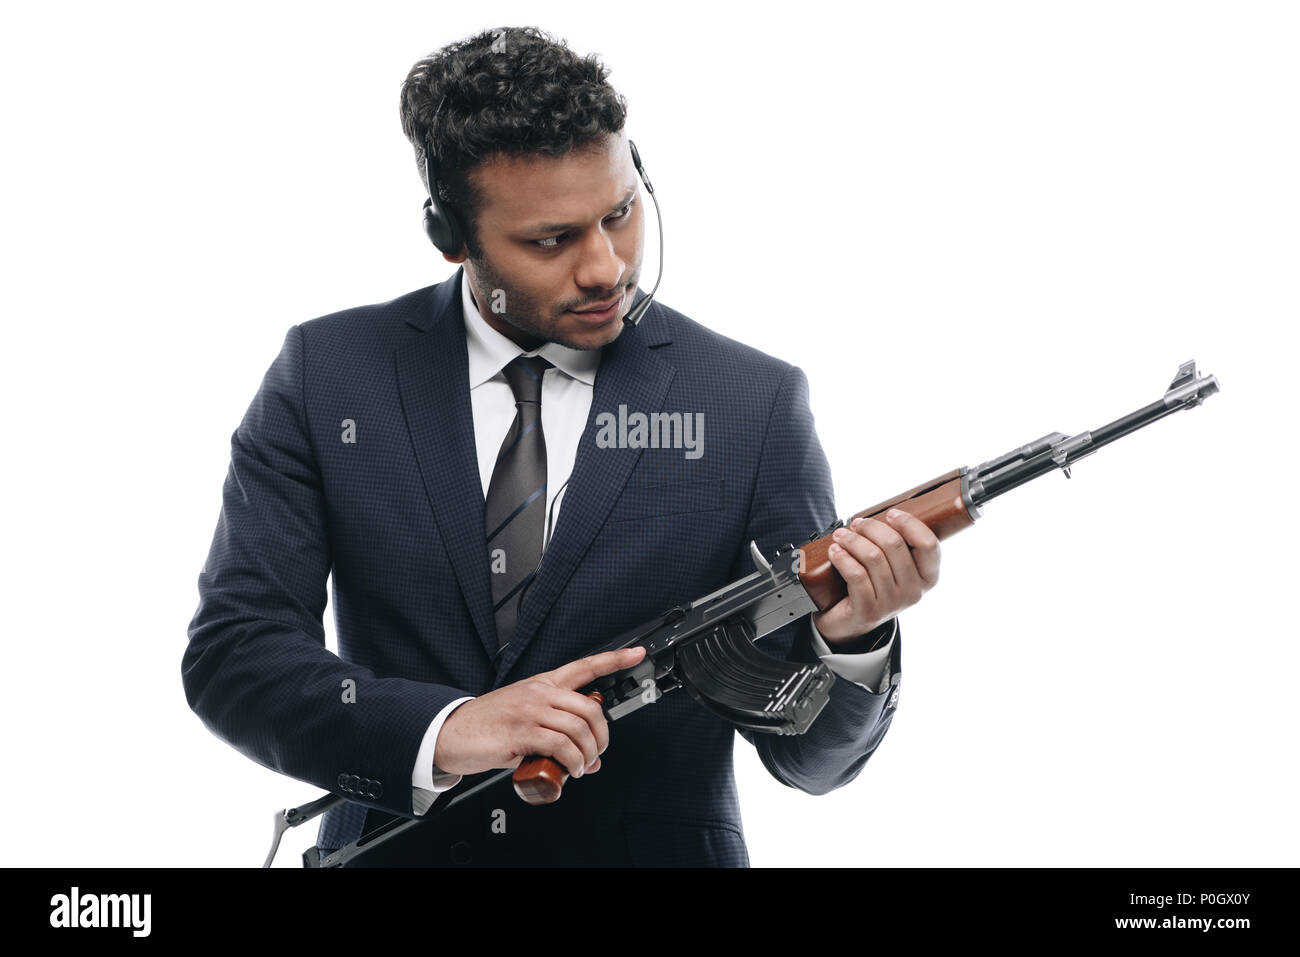 https://c8.alamy.com/comp/P0GX0Y/african-american-bodyguard-with-rifle-and-headset-isolated-on-white-P0GX0Y.jpg